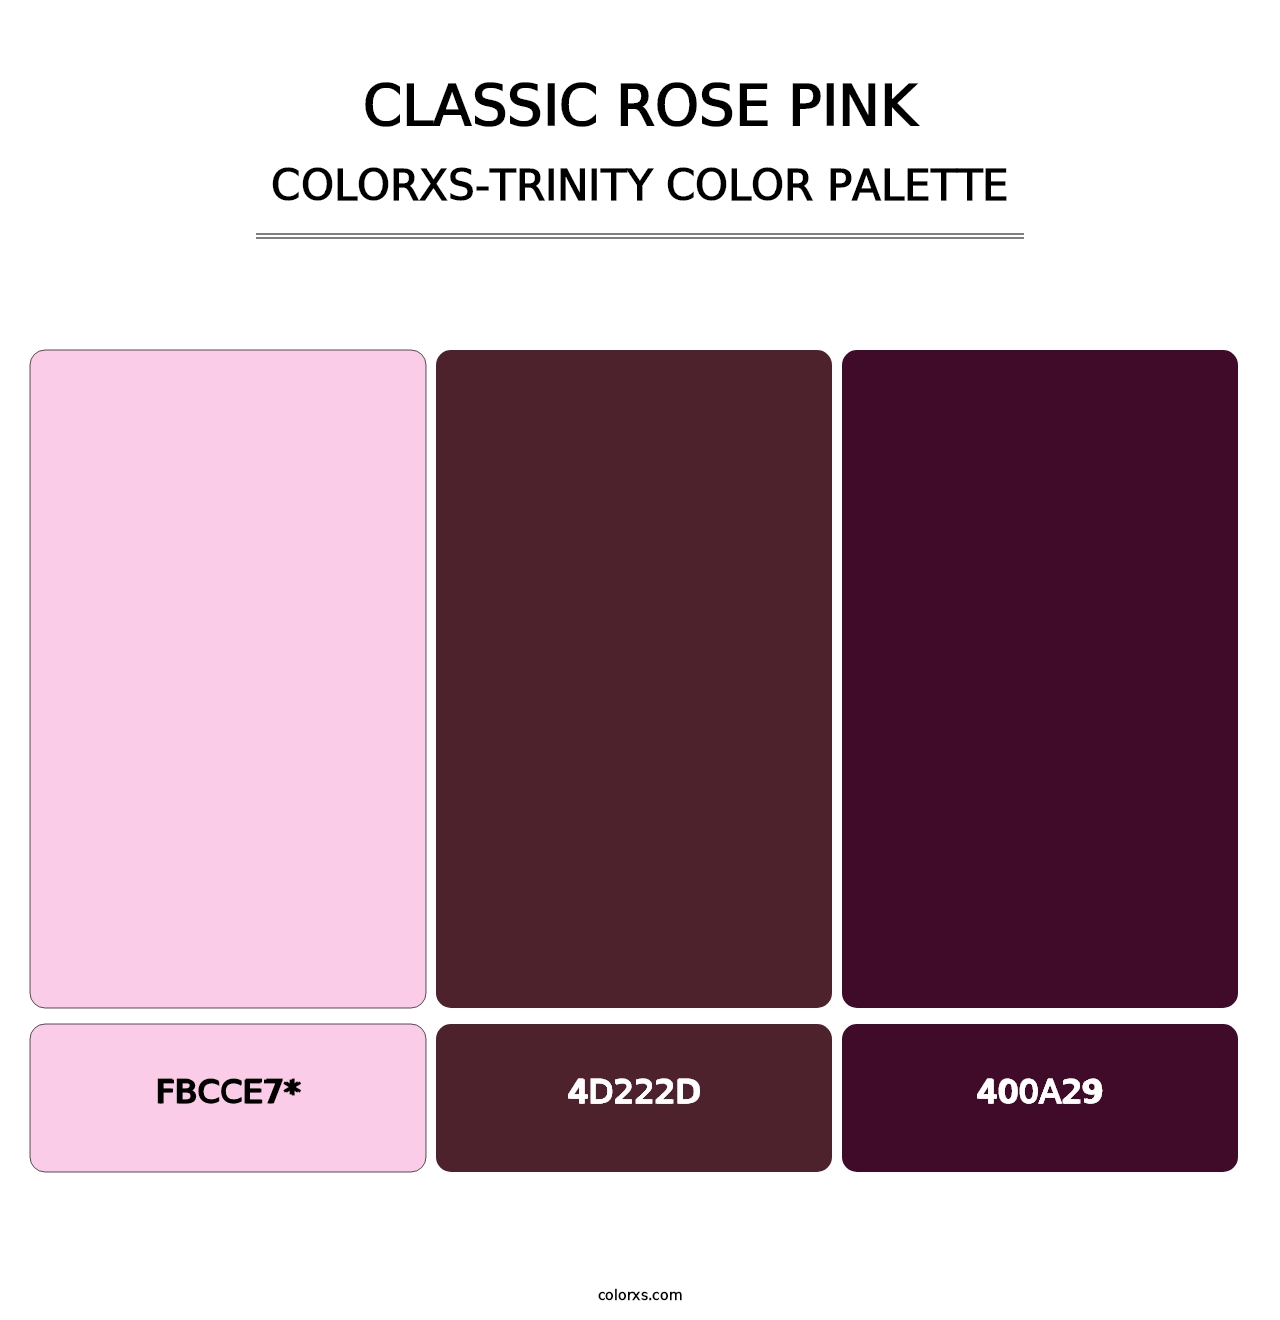 Classic Rose Pink - Colorxs Trinity Palette